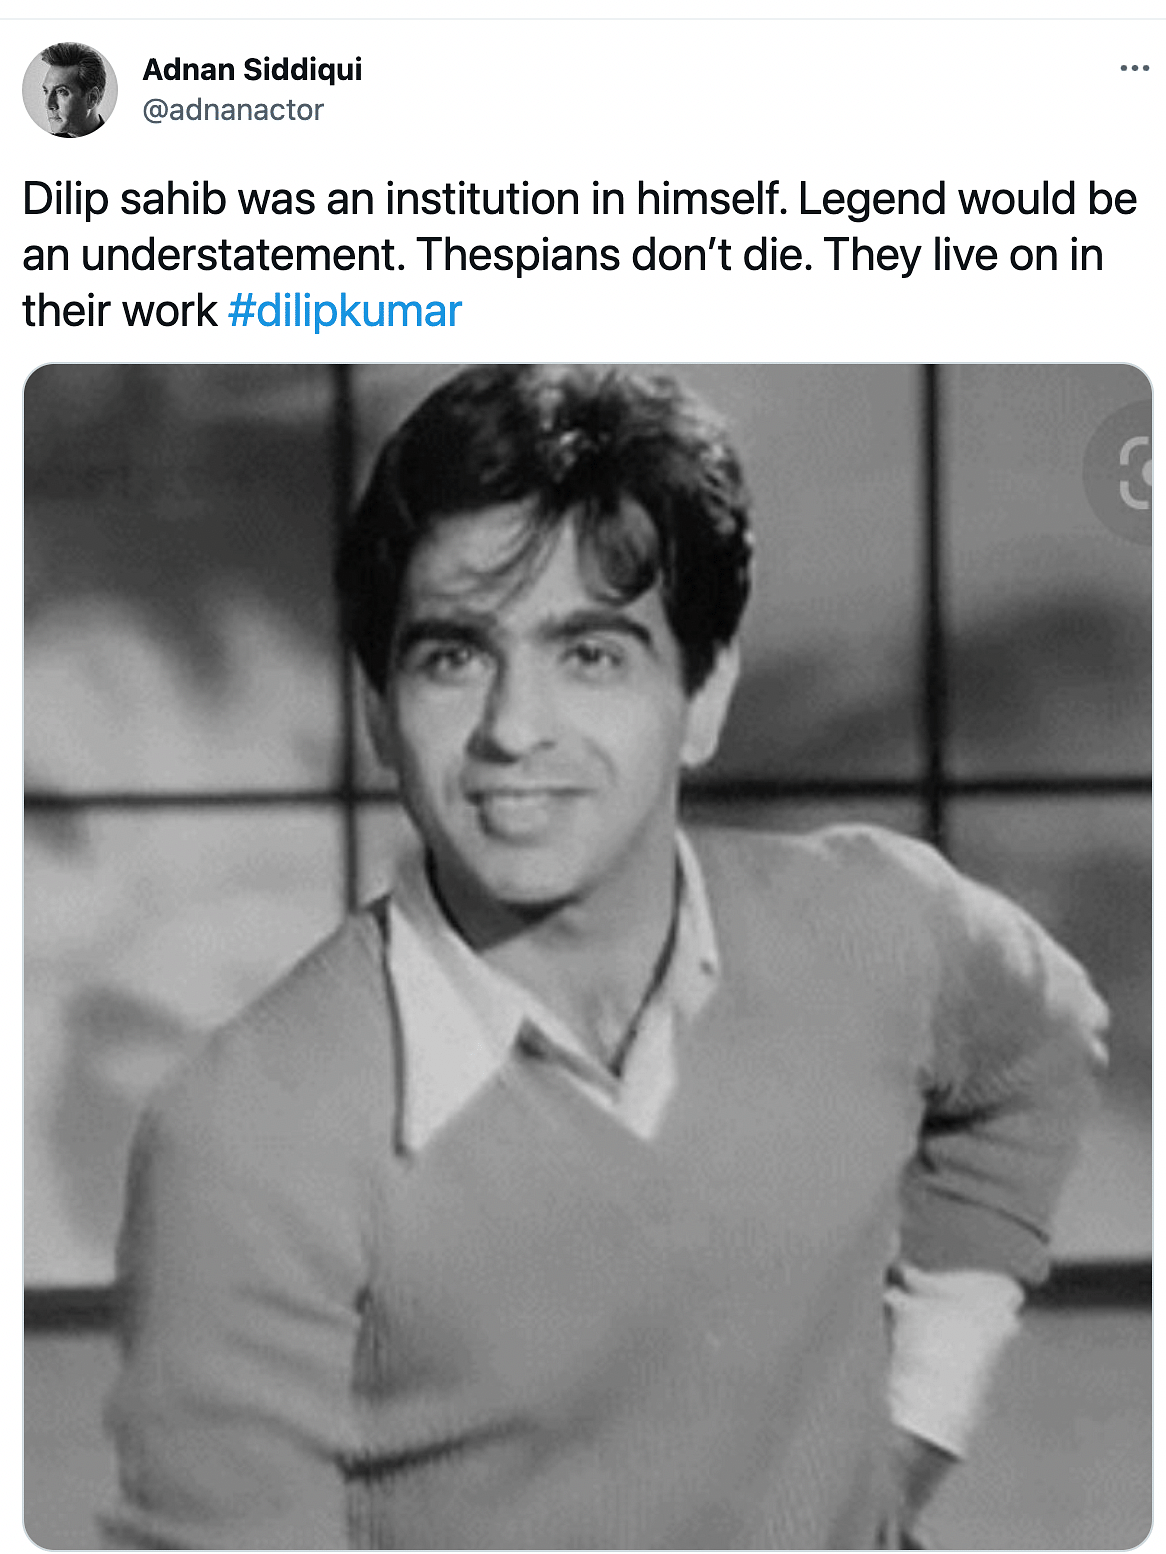 "A purist par excellence", wrote Ali Zafar in his tribute to Dilip Kumar. 